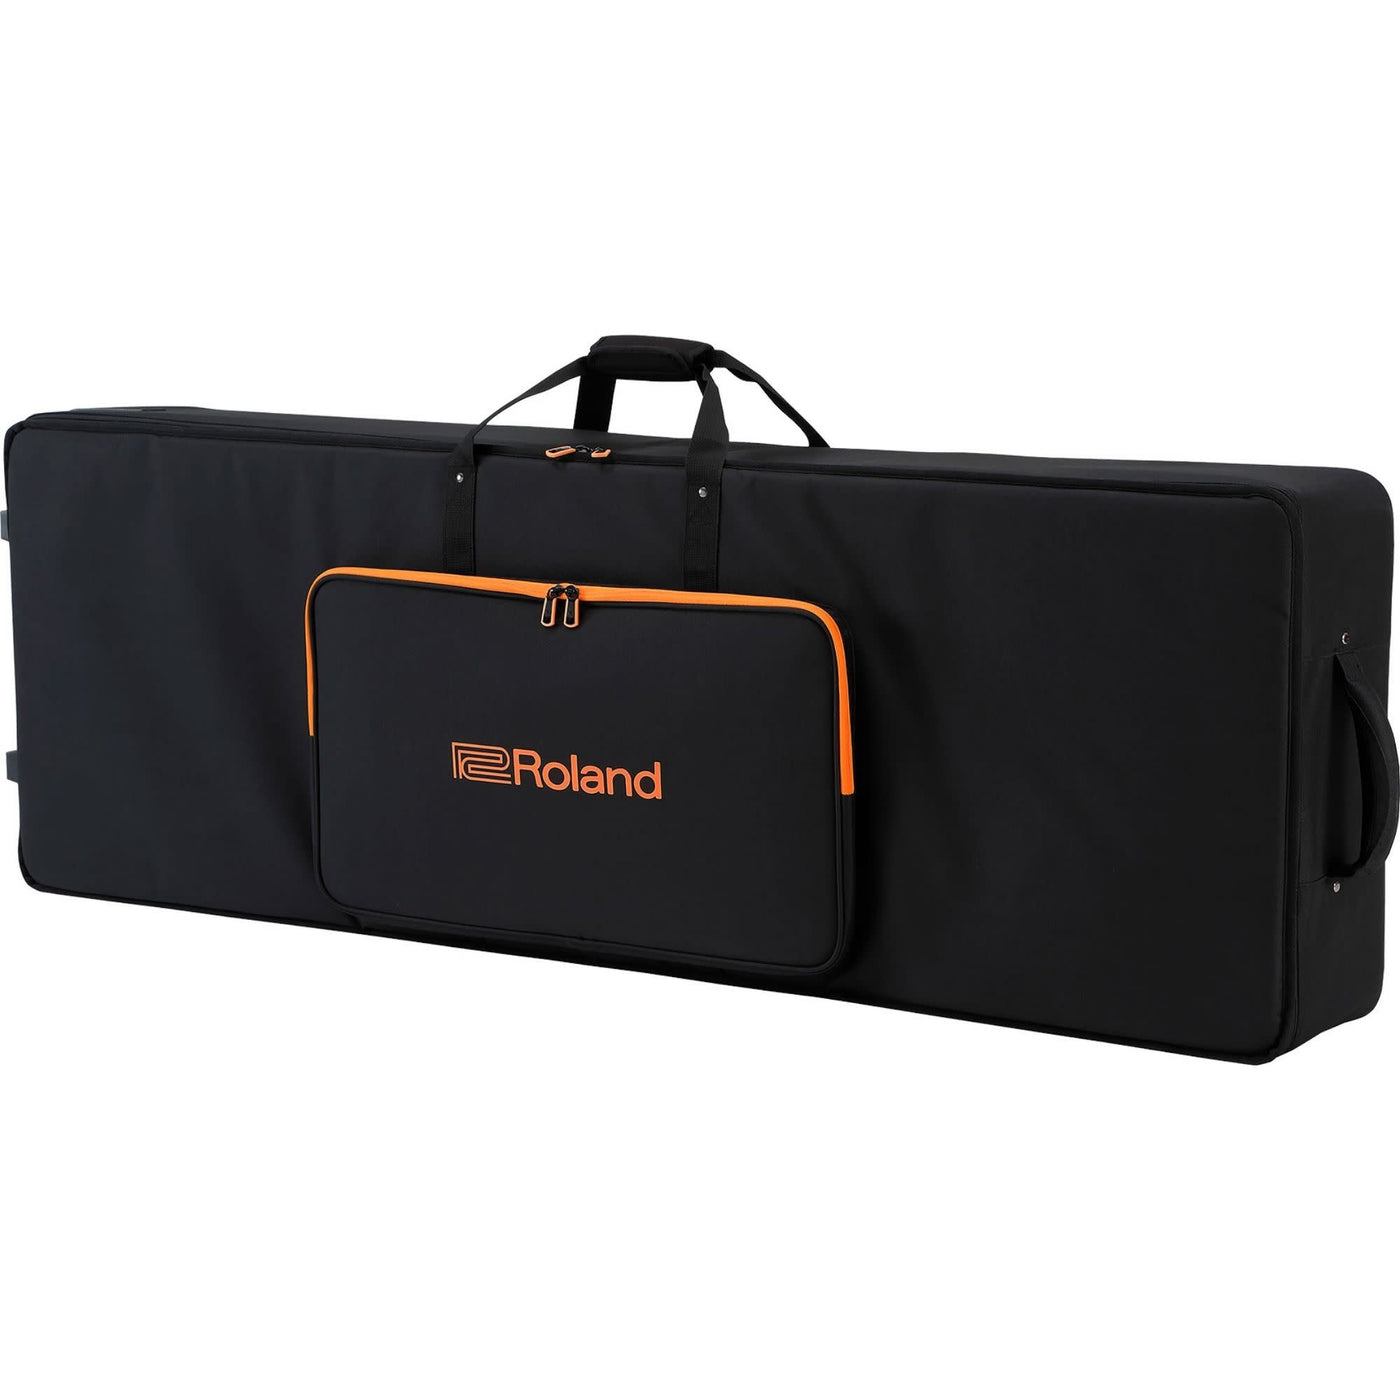 Roland SC-G88W3 Keyboard Piano Synthesizer Case, 88-Note